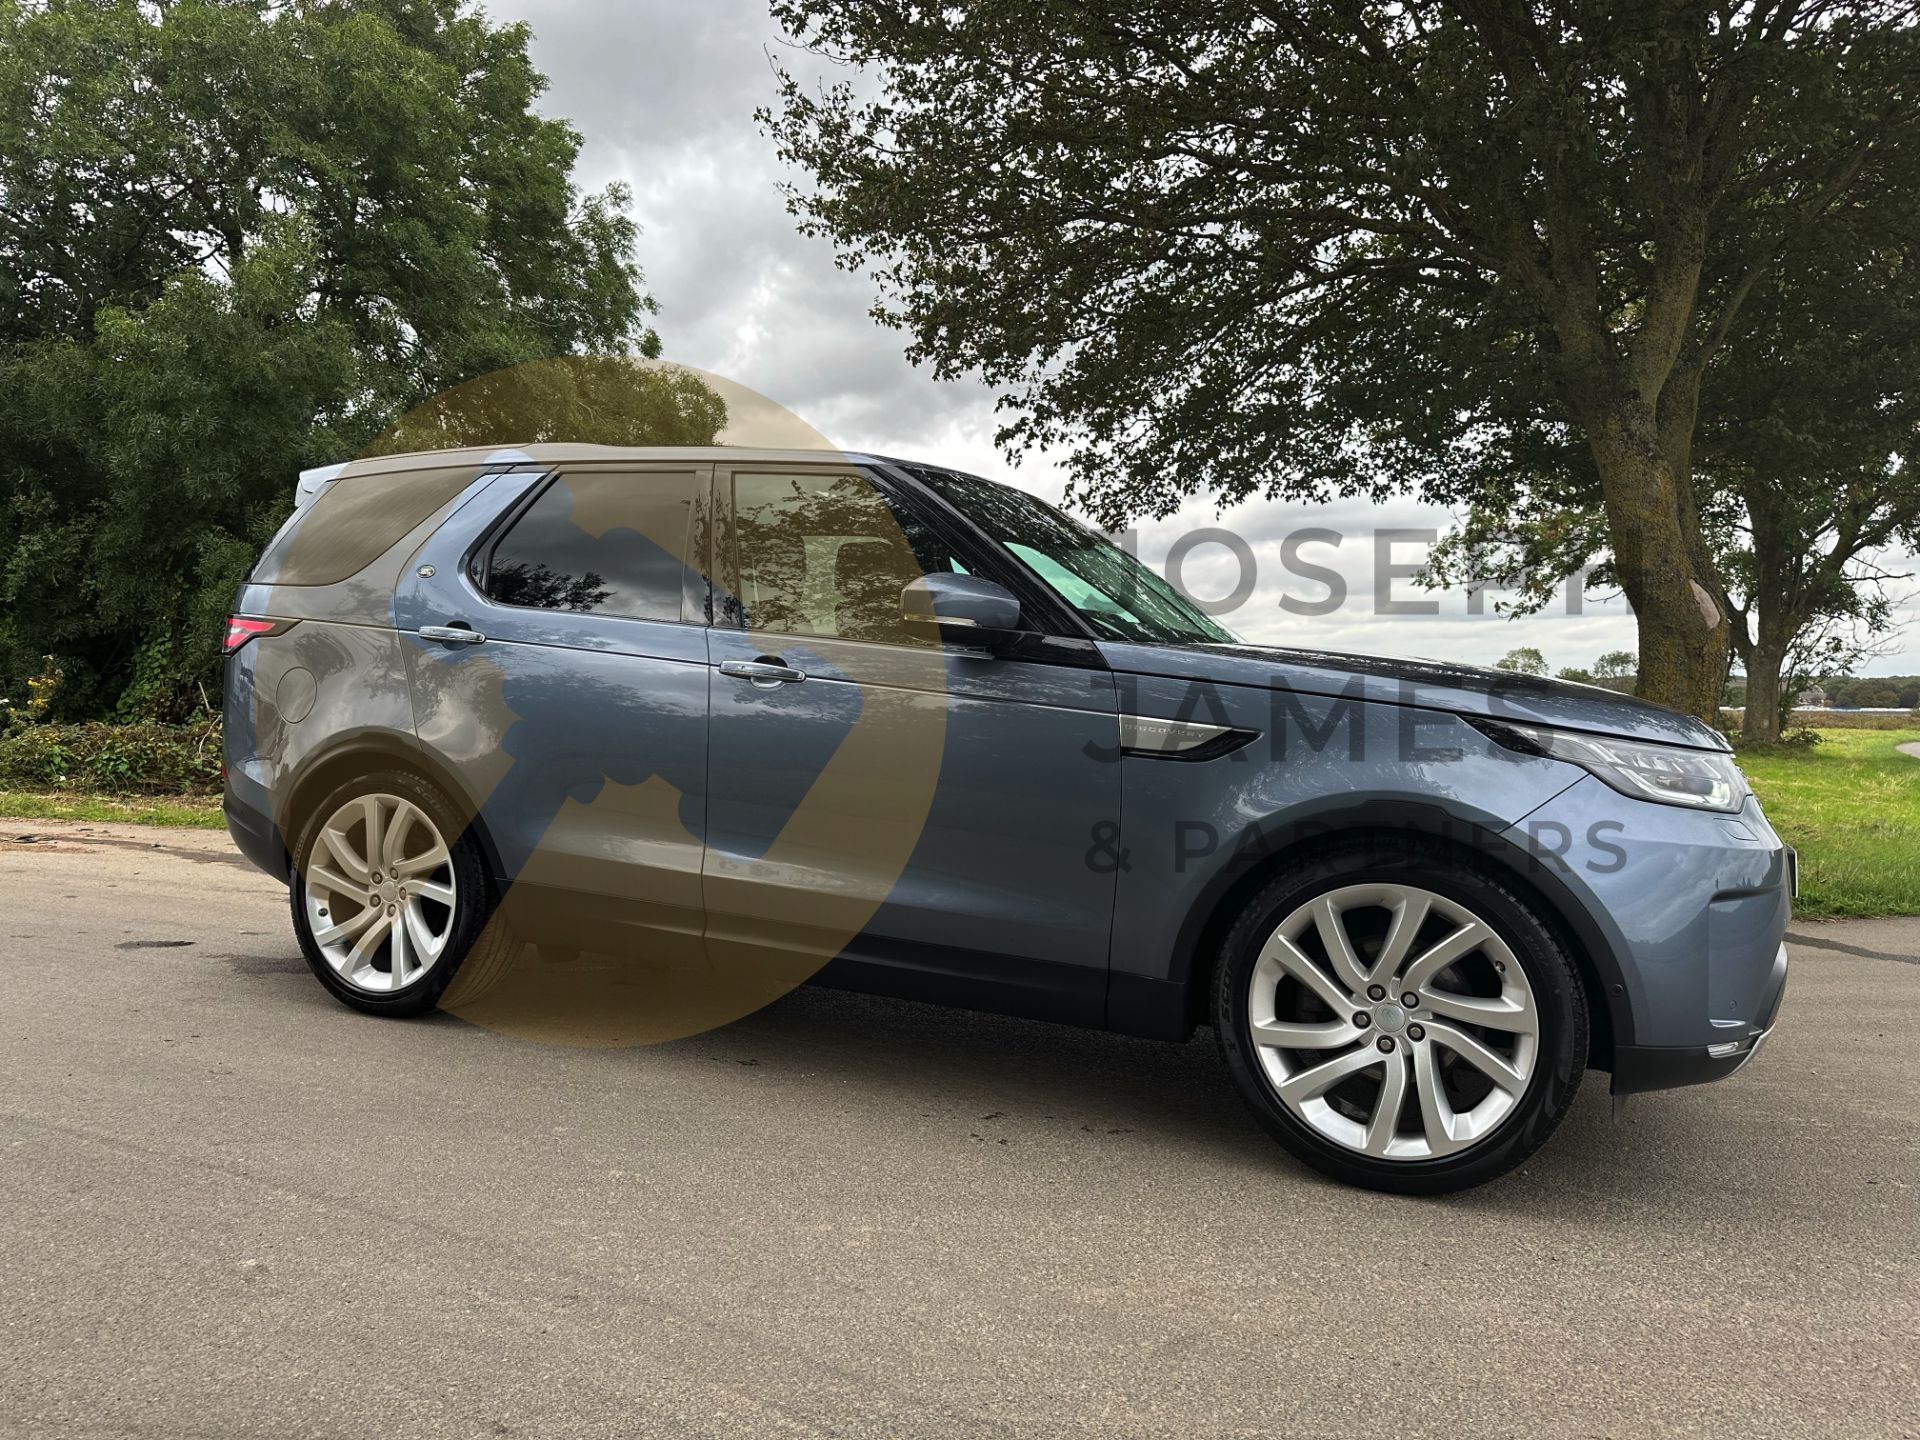 (ON SALE) LAND ROVER DISCOVERY 5 *HSE LUXURY* 7 SEATER SUV (2018 - FACELIFT MODEL) (LOW MILEAGE)